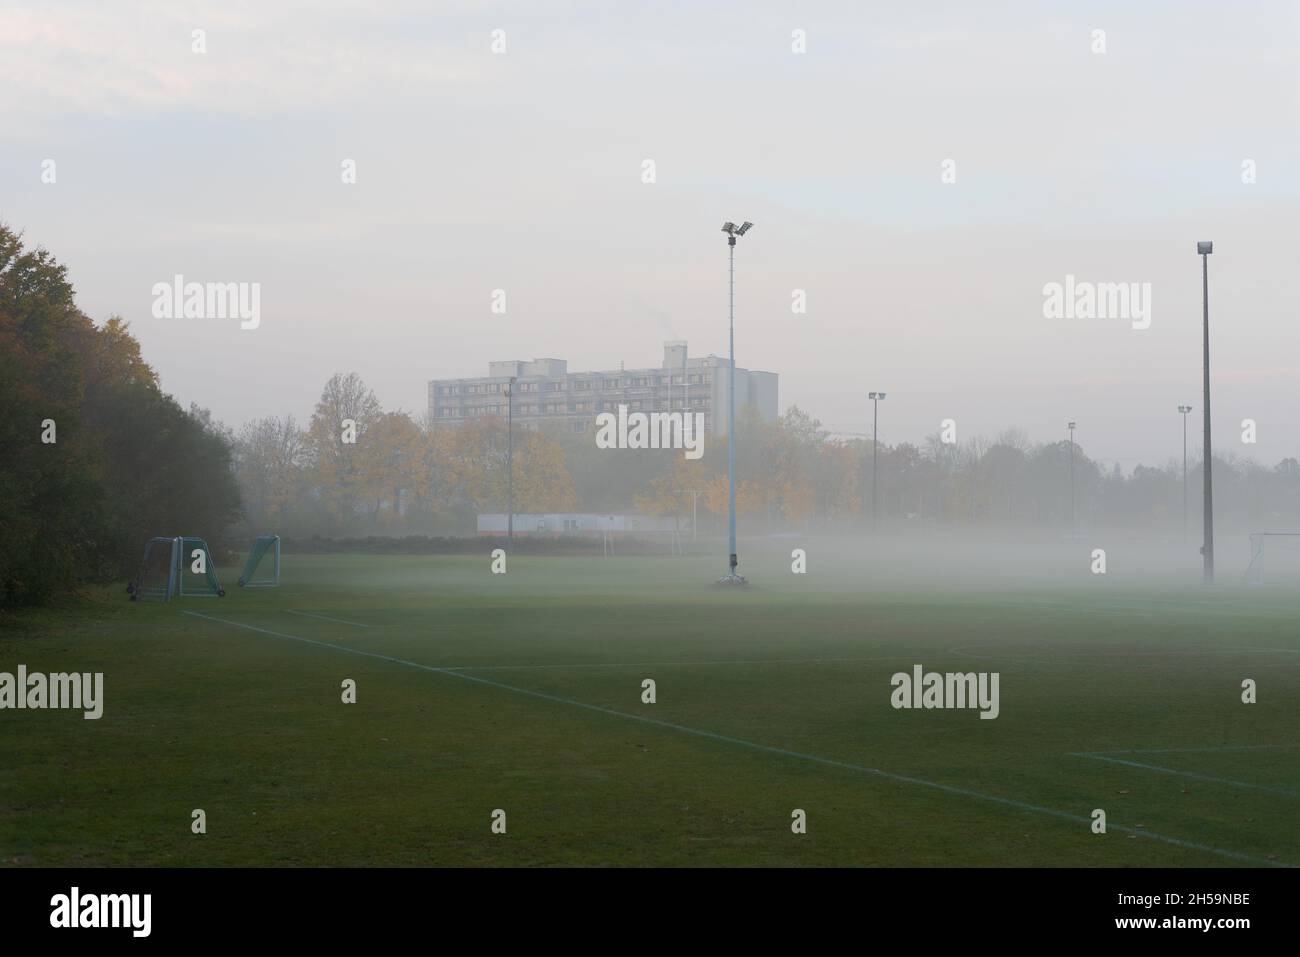 Empty and deserted soccer field in suburban area with goals and flood light poles on grey overcast day with fog and mist Stock Photo